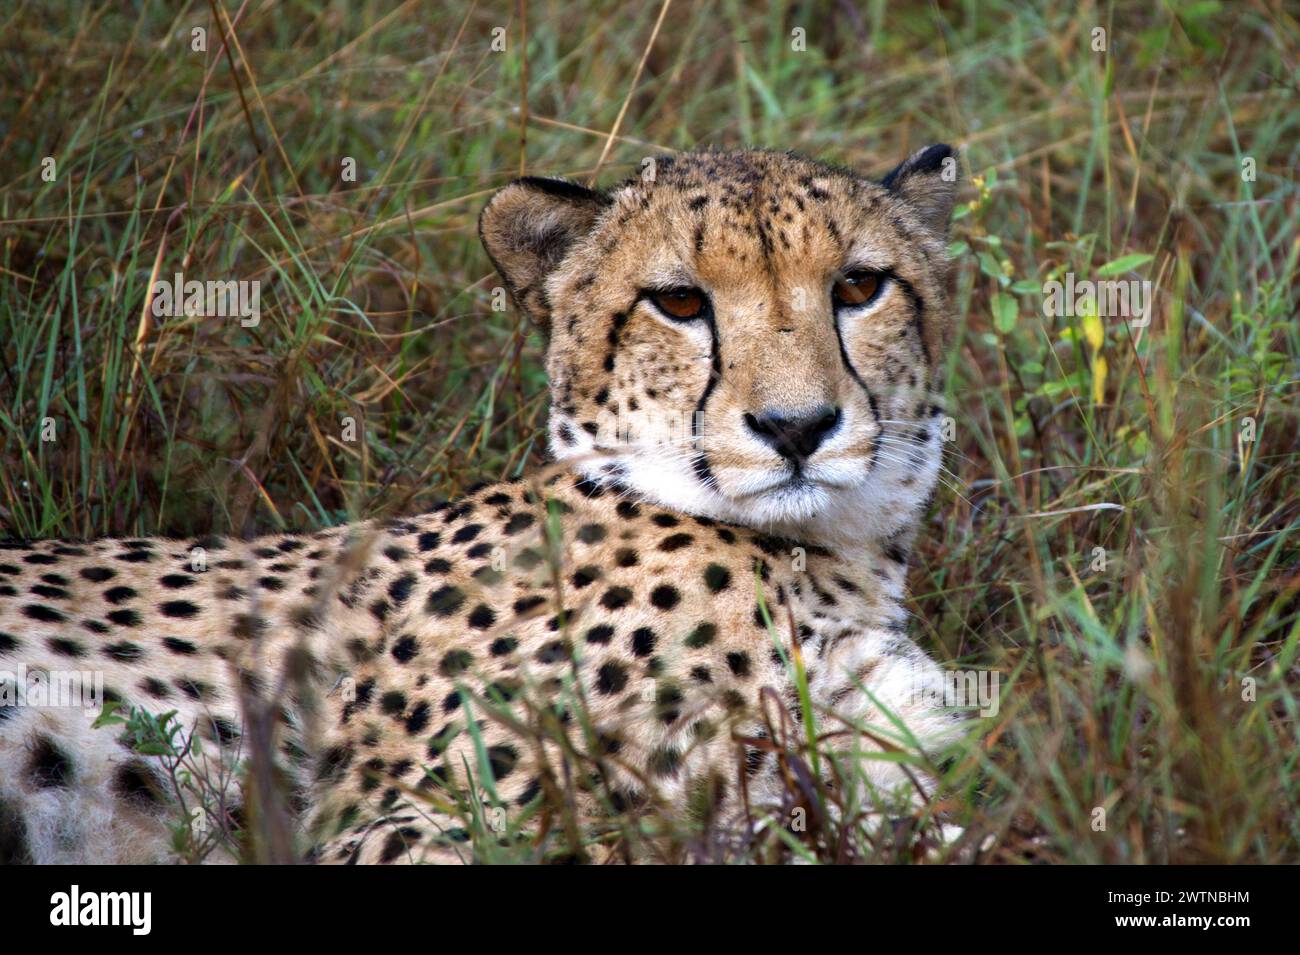 A Cheetah seen while on Safari in Karongwe Game Reserve, South Africa Stock Photo